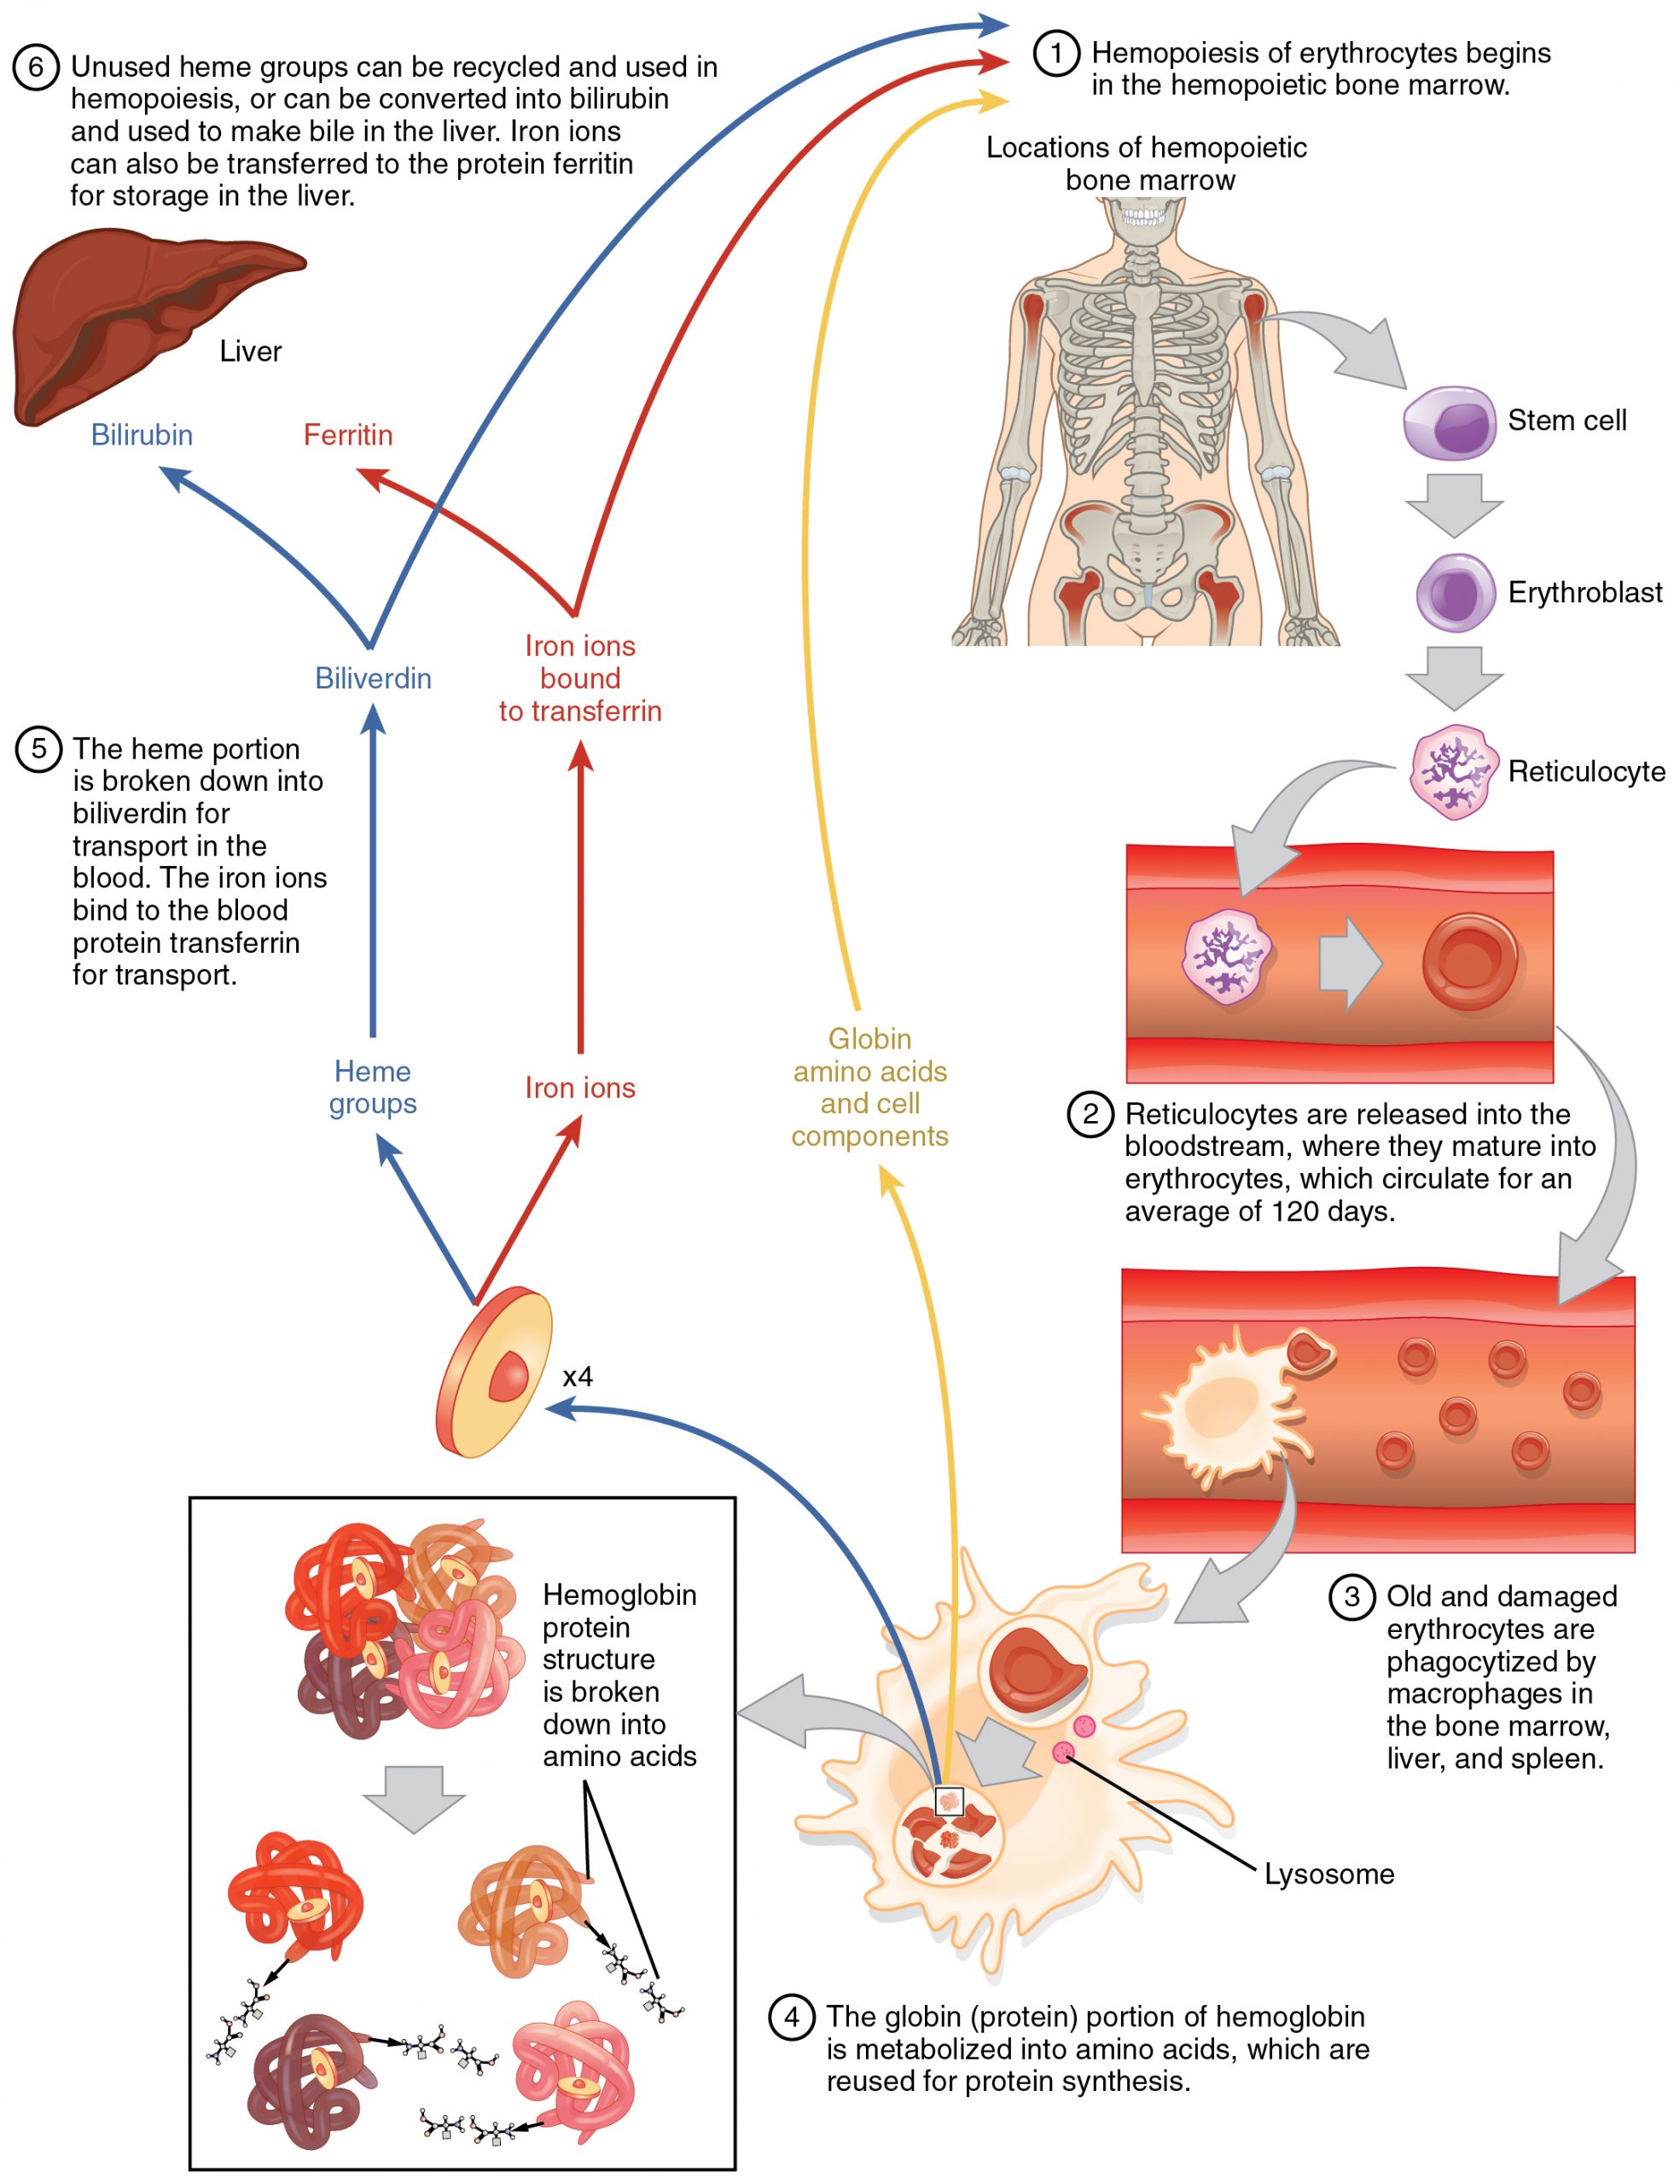 This flow chart shows the life cycle of a red blood cell. The first step is the hemopoeisis of erythrocytes in the bone marrow. Further steps in this diagram show the passage of erythrocytes through the blood stream, the breakdown of heme protein, and liver function.